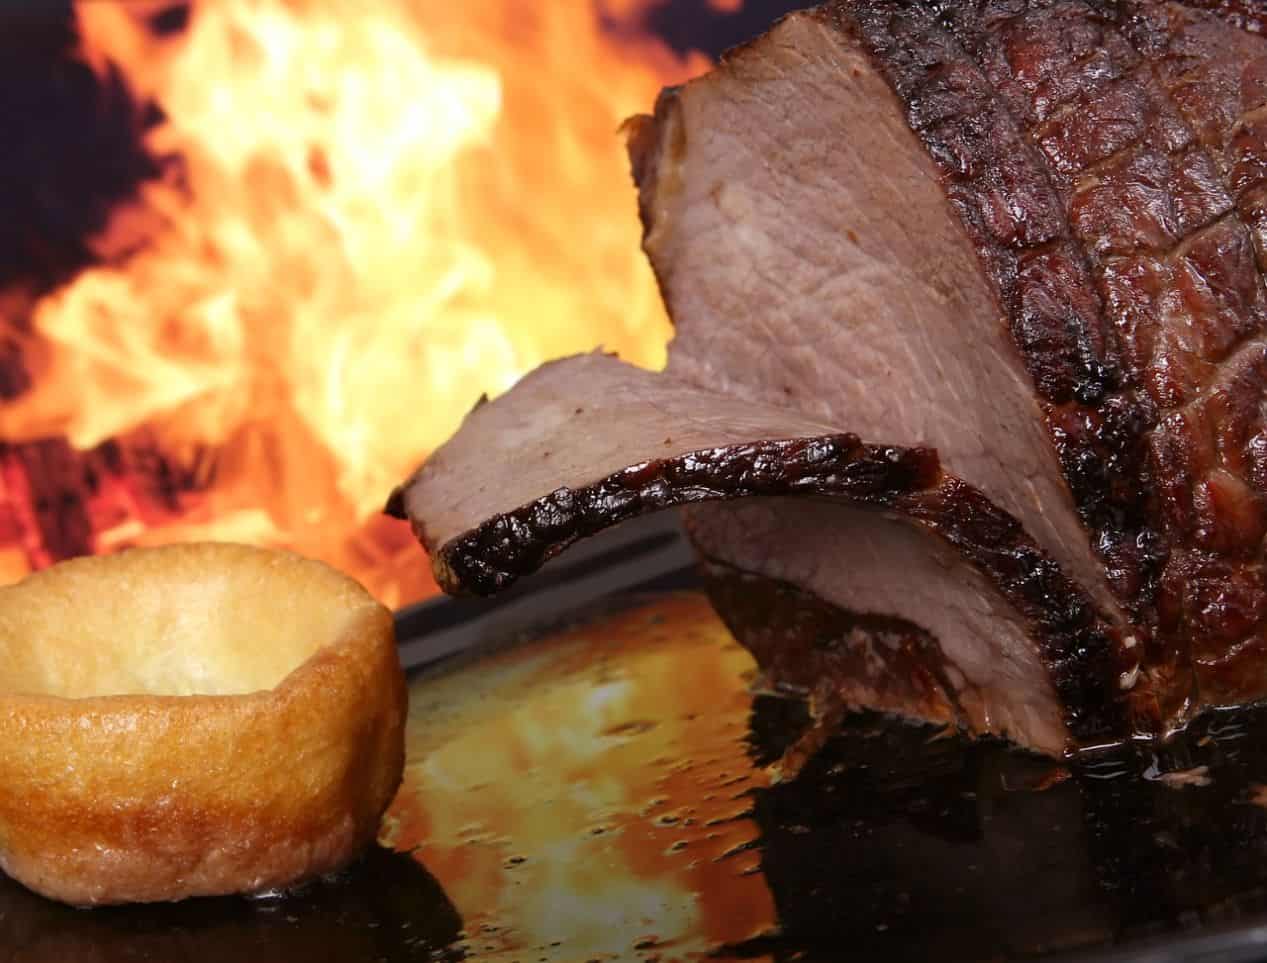 BBQ beef and Yorkshire pudding in front of open flame